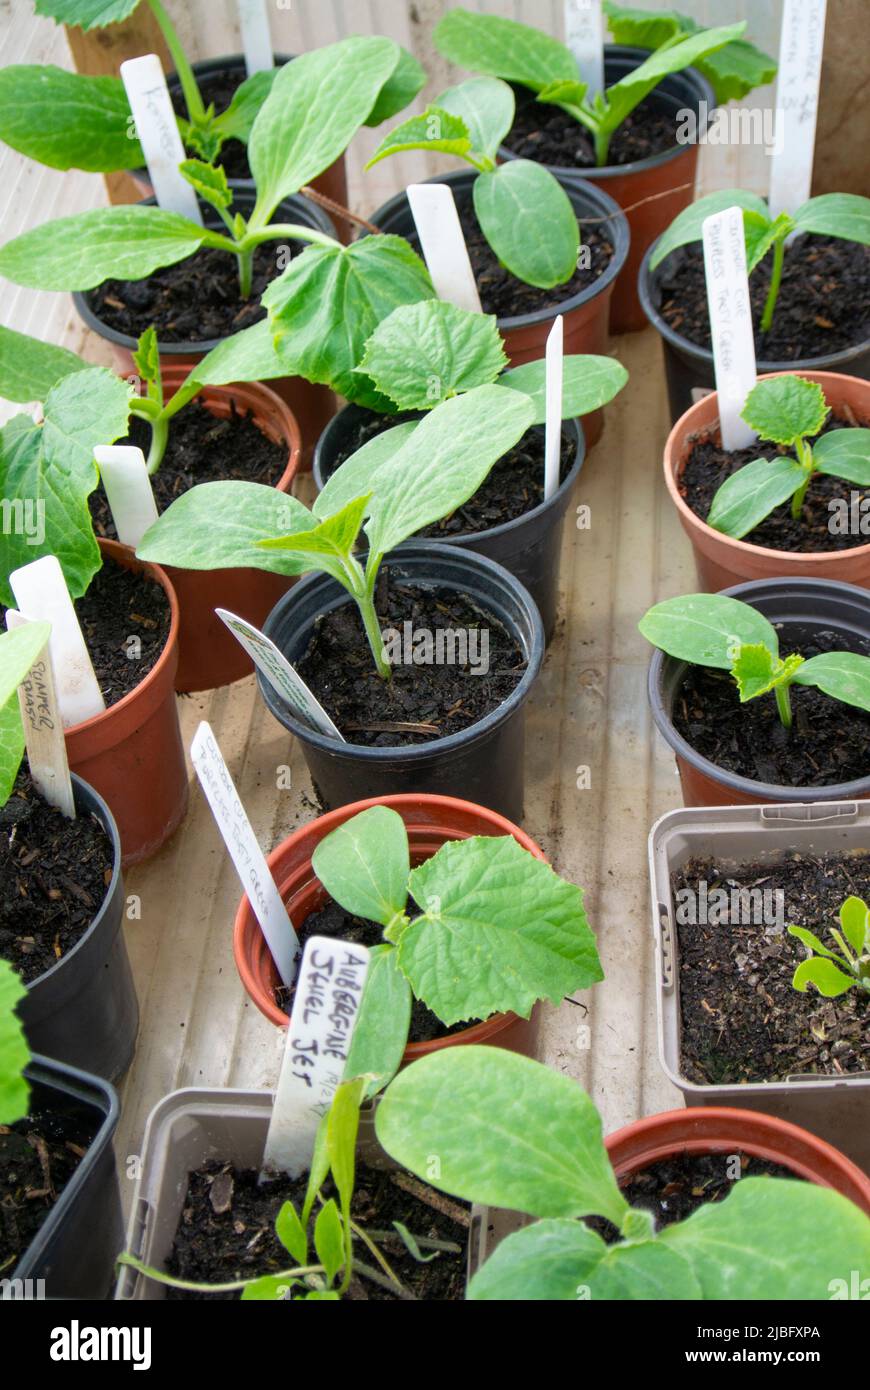 young vegetable plants in pots Stock Photo